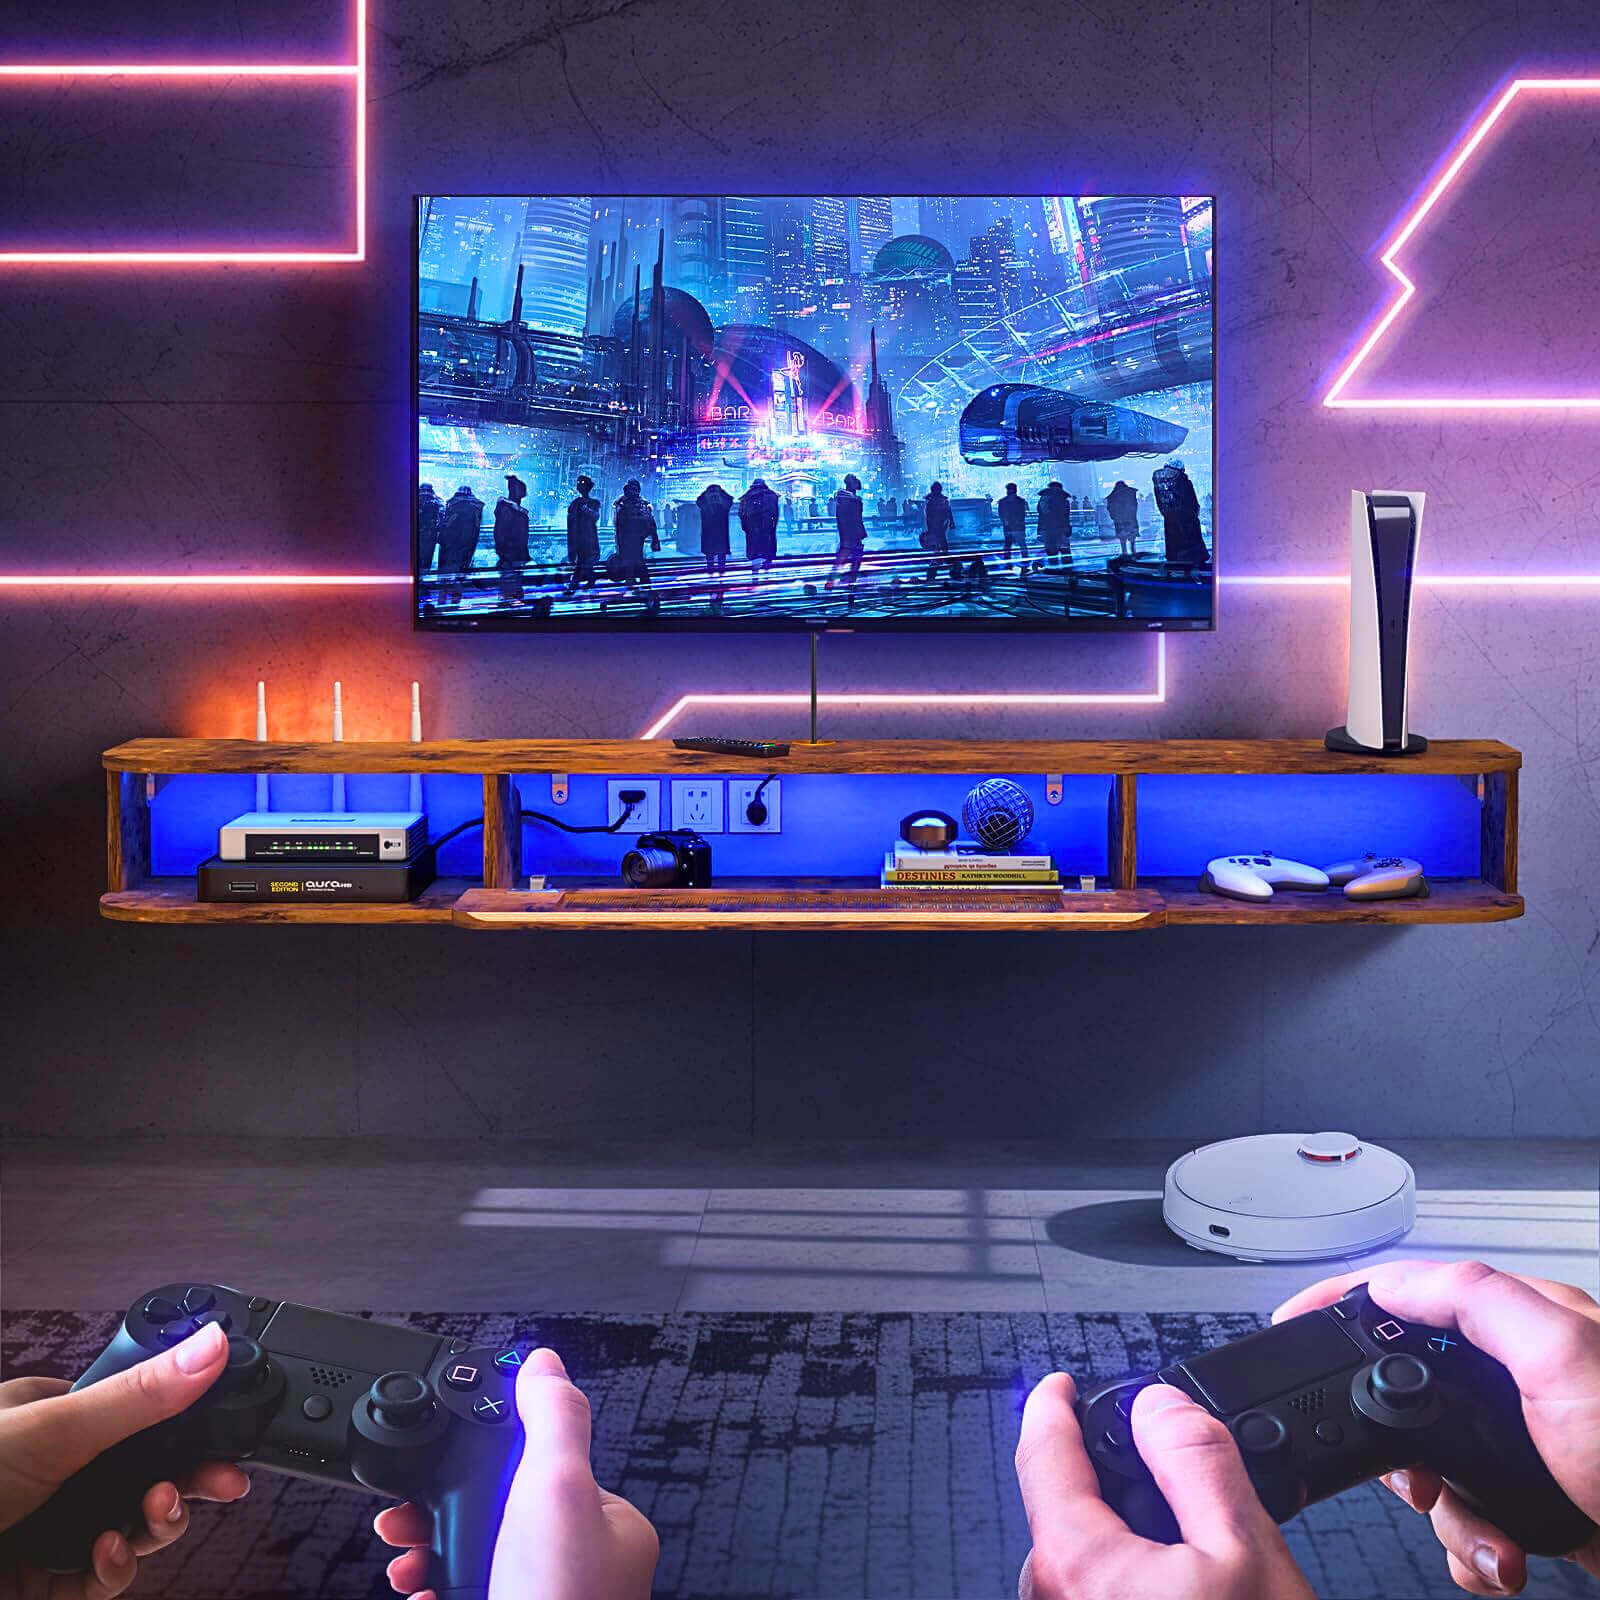 Custom Wood Floating TV Stand Wall Shelf with LED Lights and Glass Door